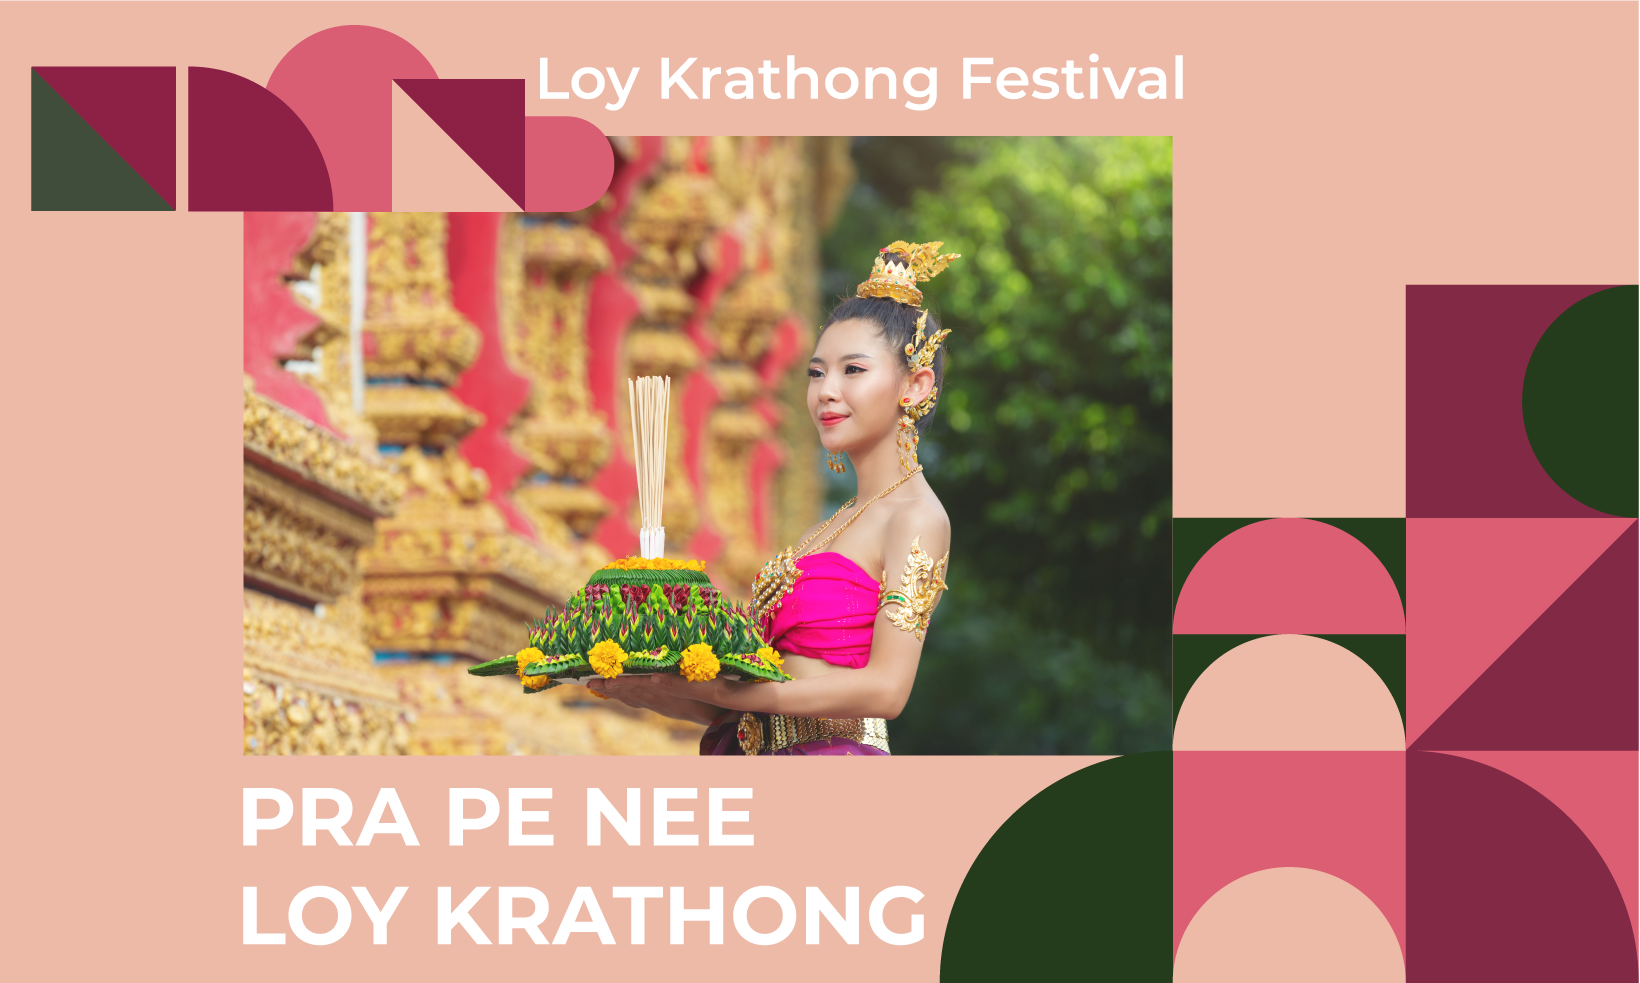 Loy Krathong festival in Thailand is famous for nang noppamas competition of beautiful krathong and beauty pageant